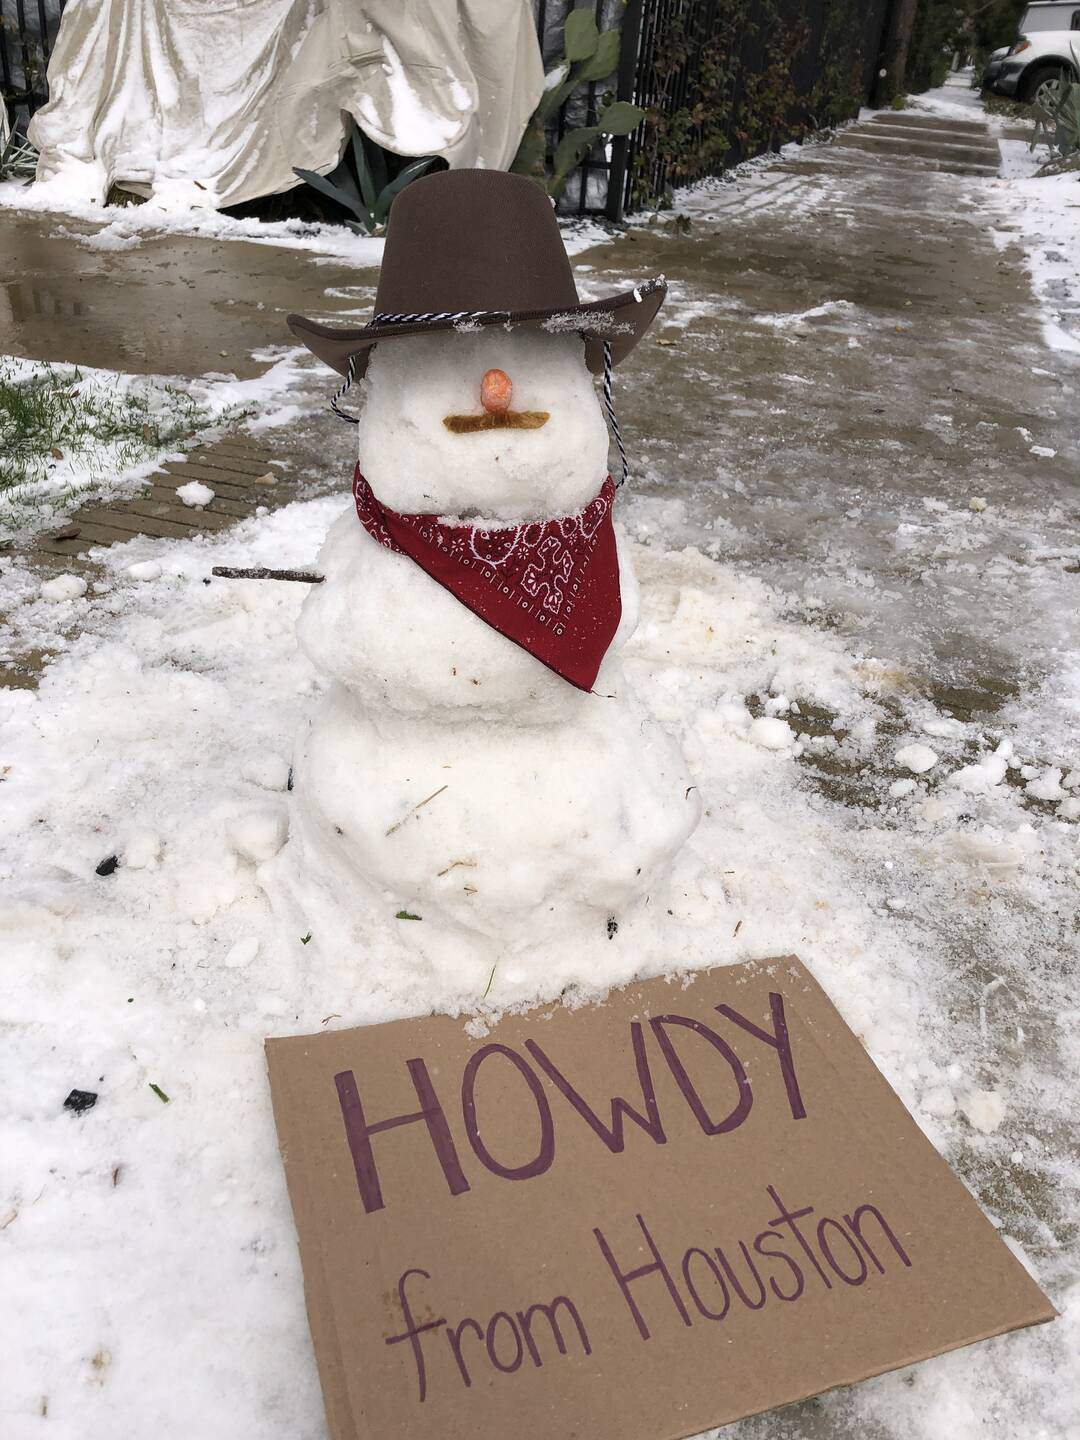 PHOTOS: Here are the best Houston snowmen we could find of the arctic blast